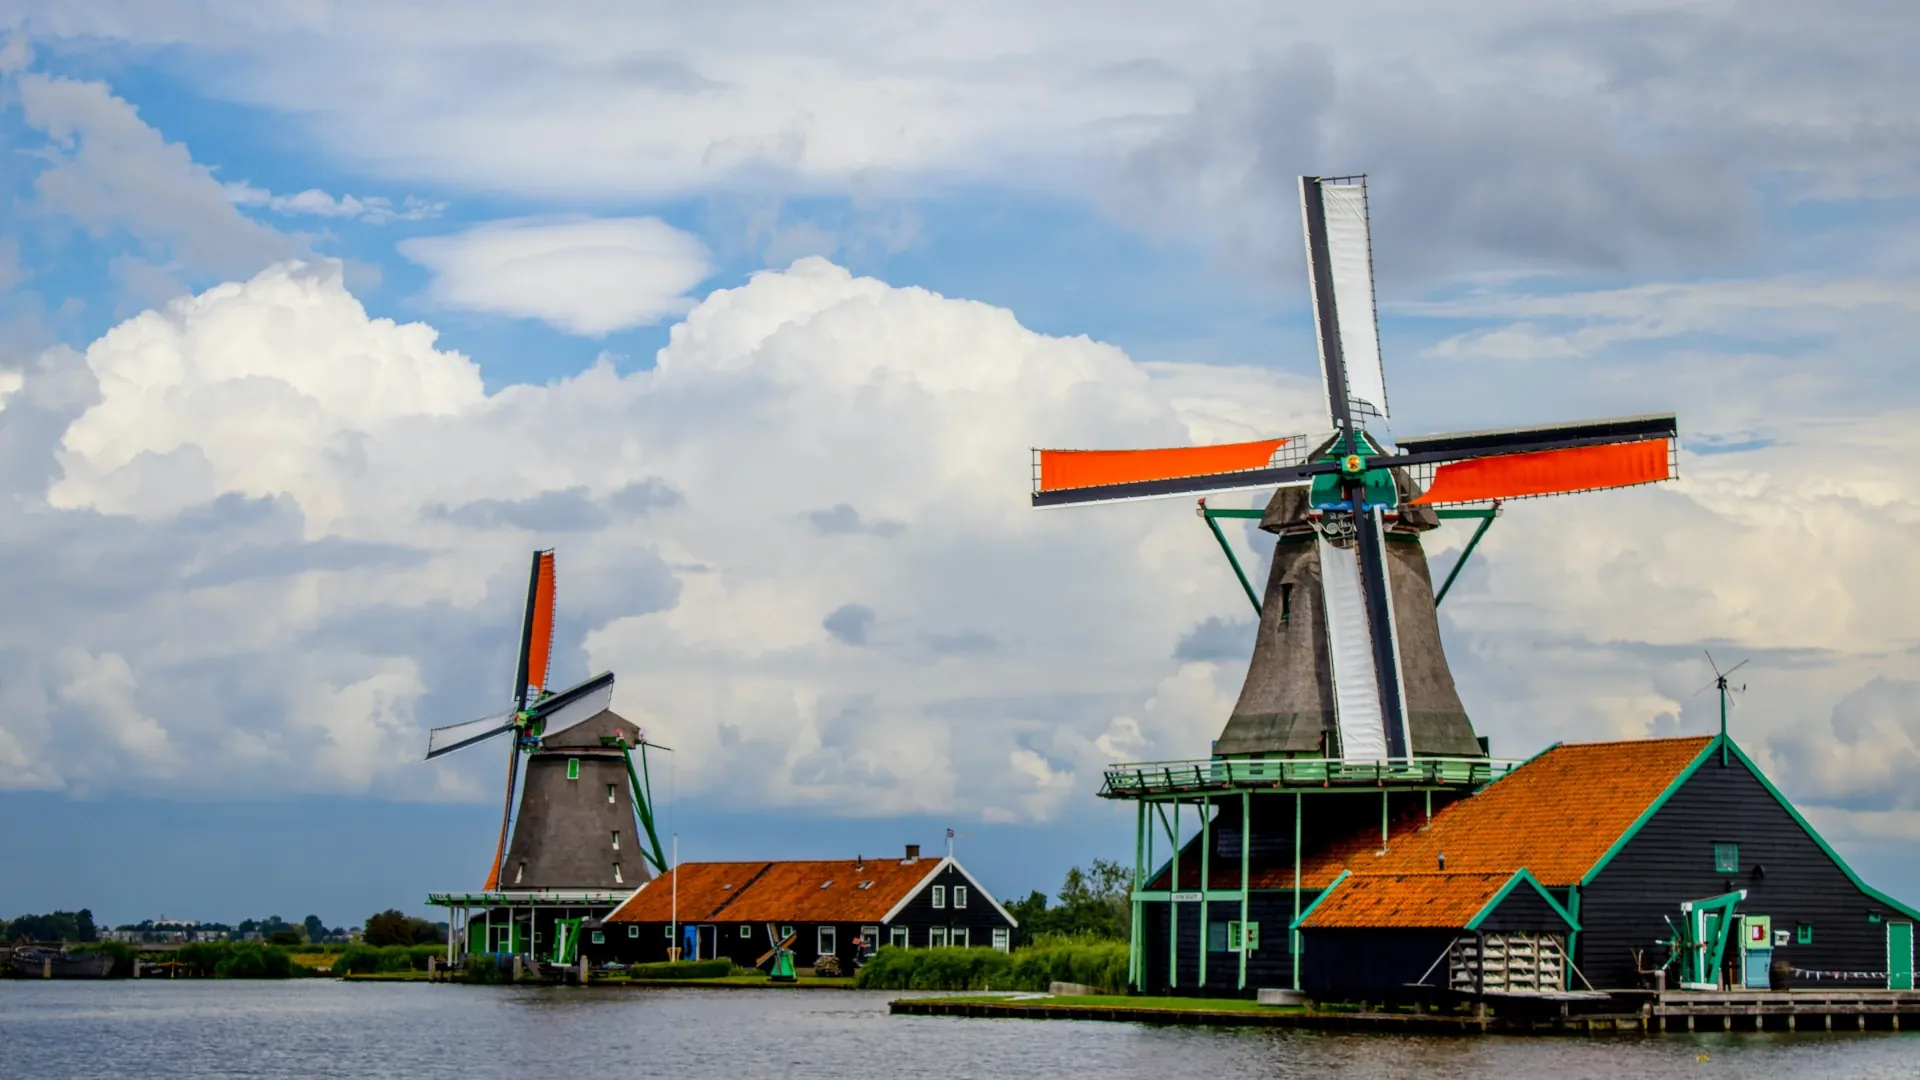 Two windmills on the banks of a canal in the city of Zaanse Schans